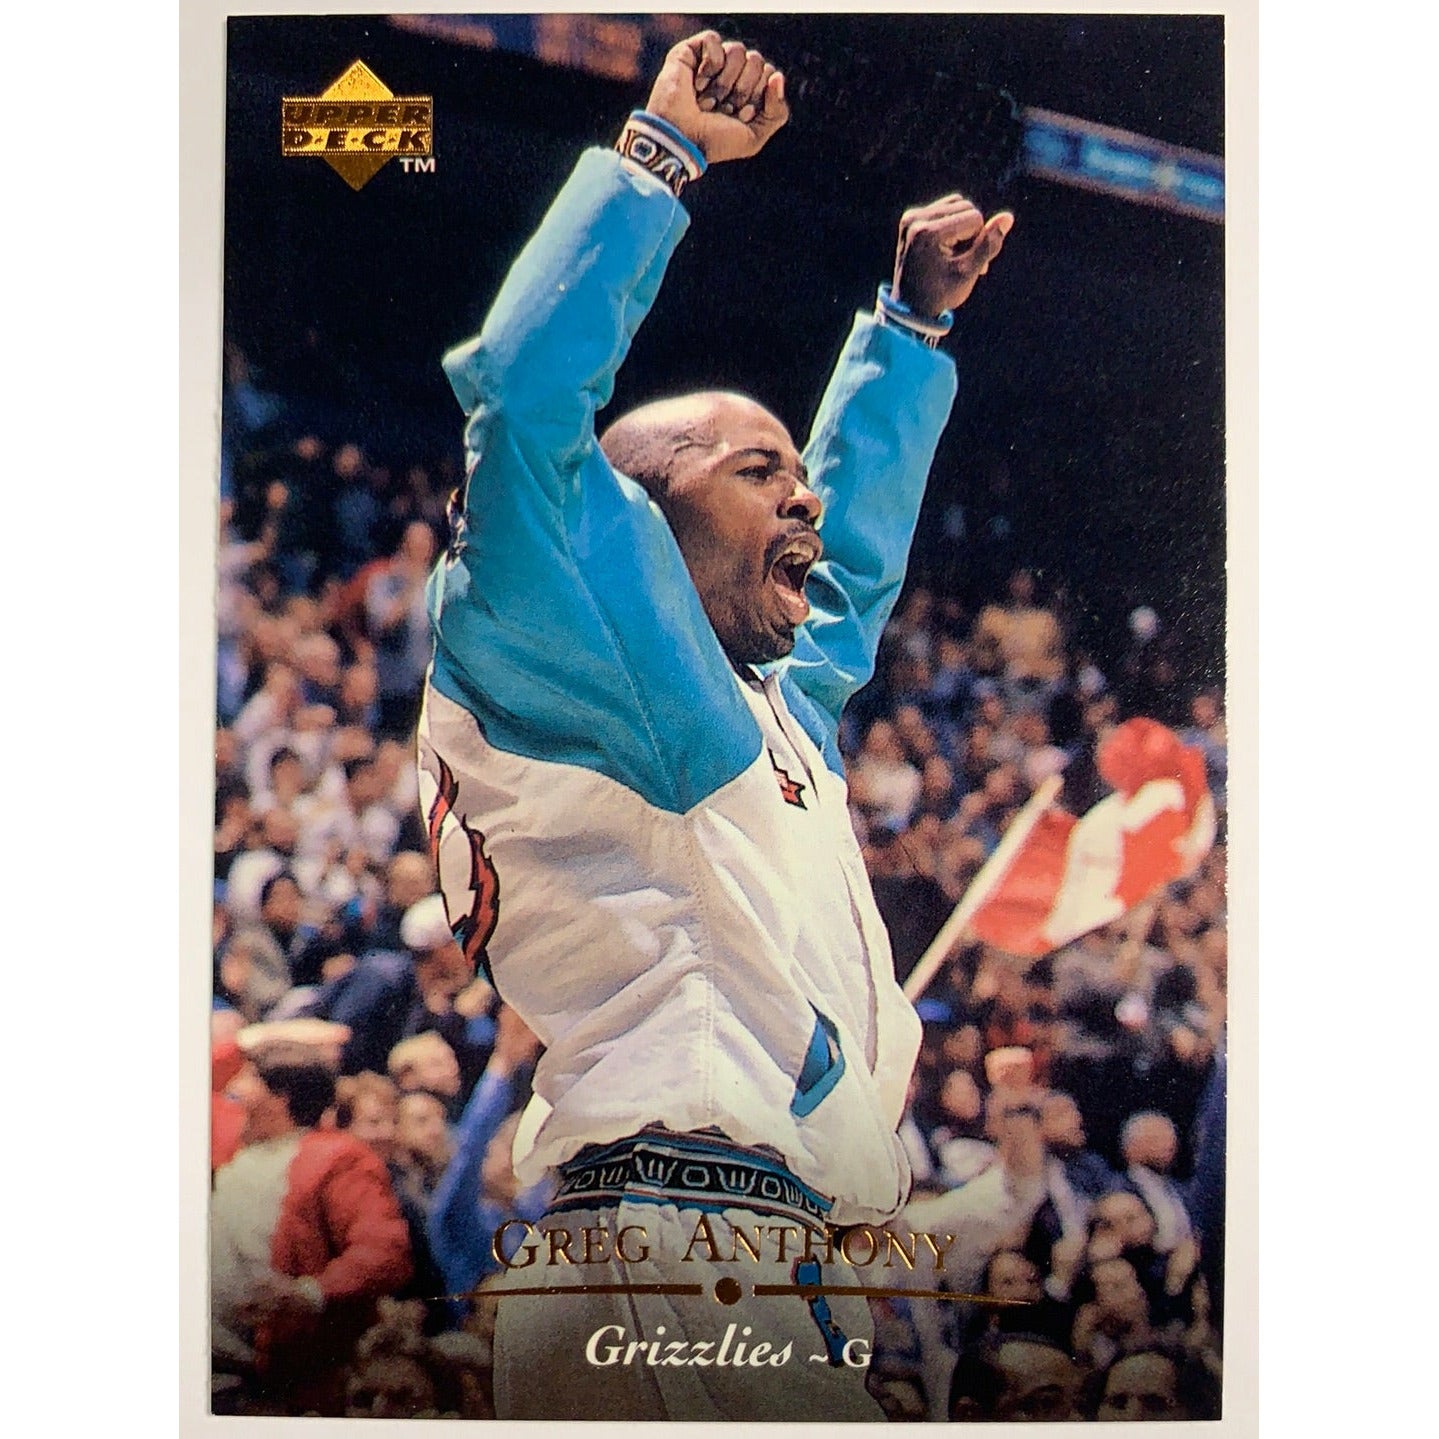 1995-96 Upper Deck Greg Anthony Base #257-Local Legends Cards & Collectibles